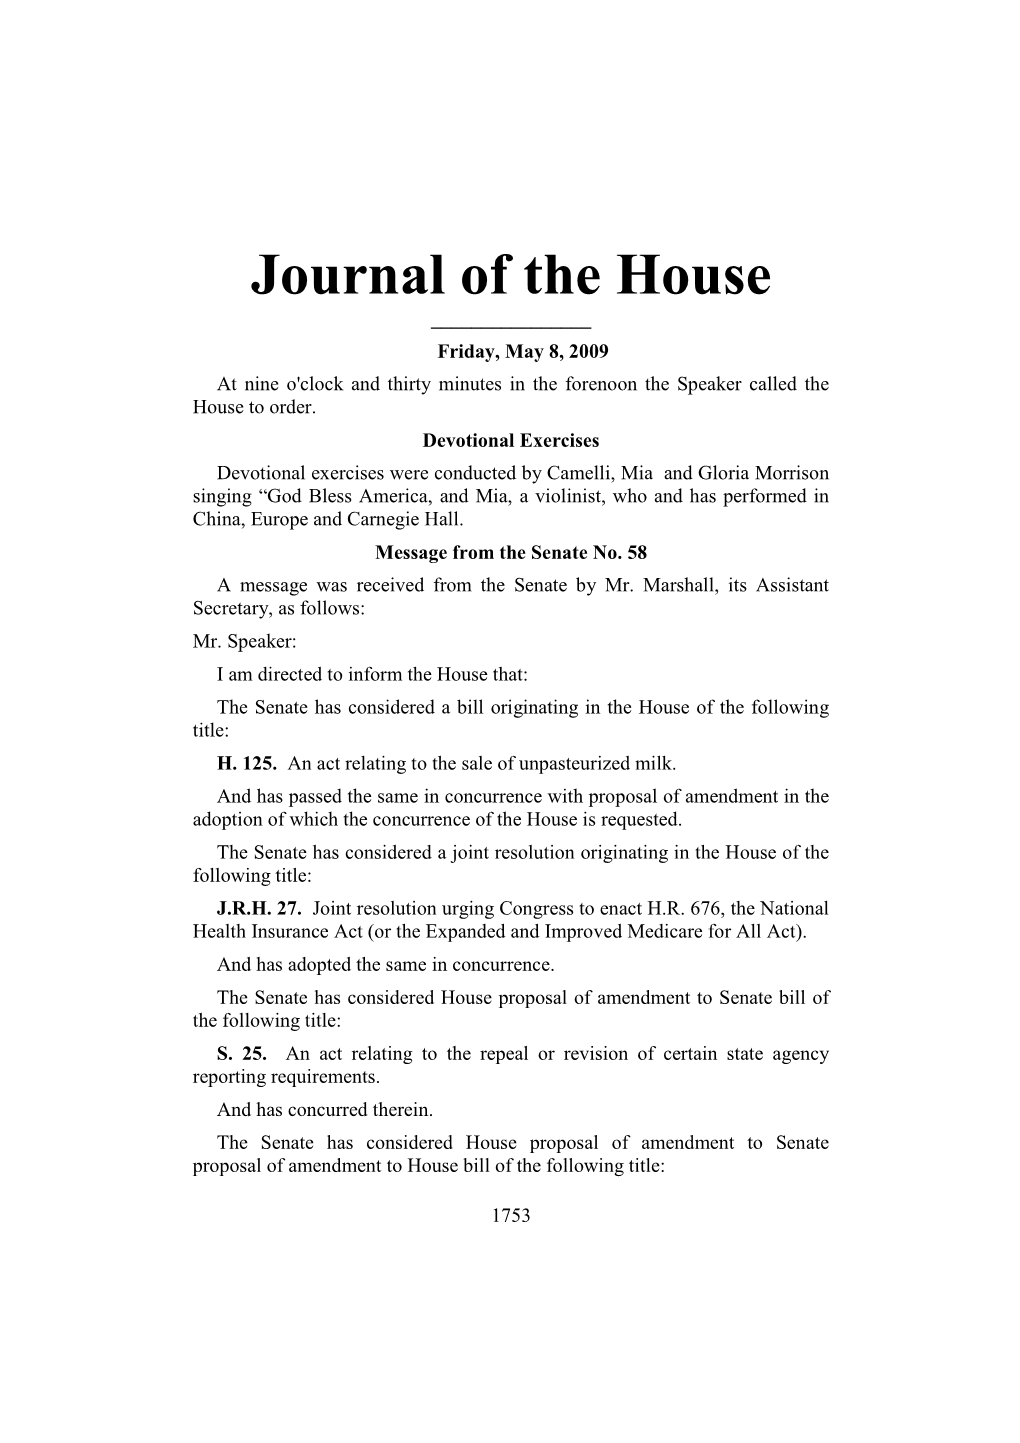 Journal of the House ______Friday, May 8, 2009 at Nine O'clock and Thirty Minutes in the Forenoon the Speaker Called the House to Order